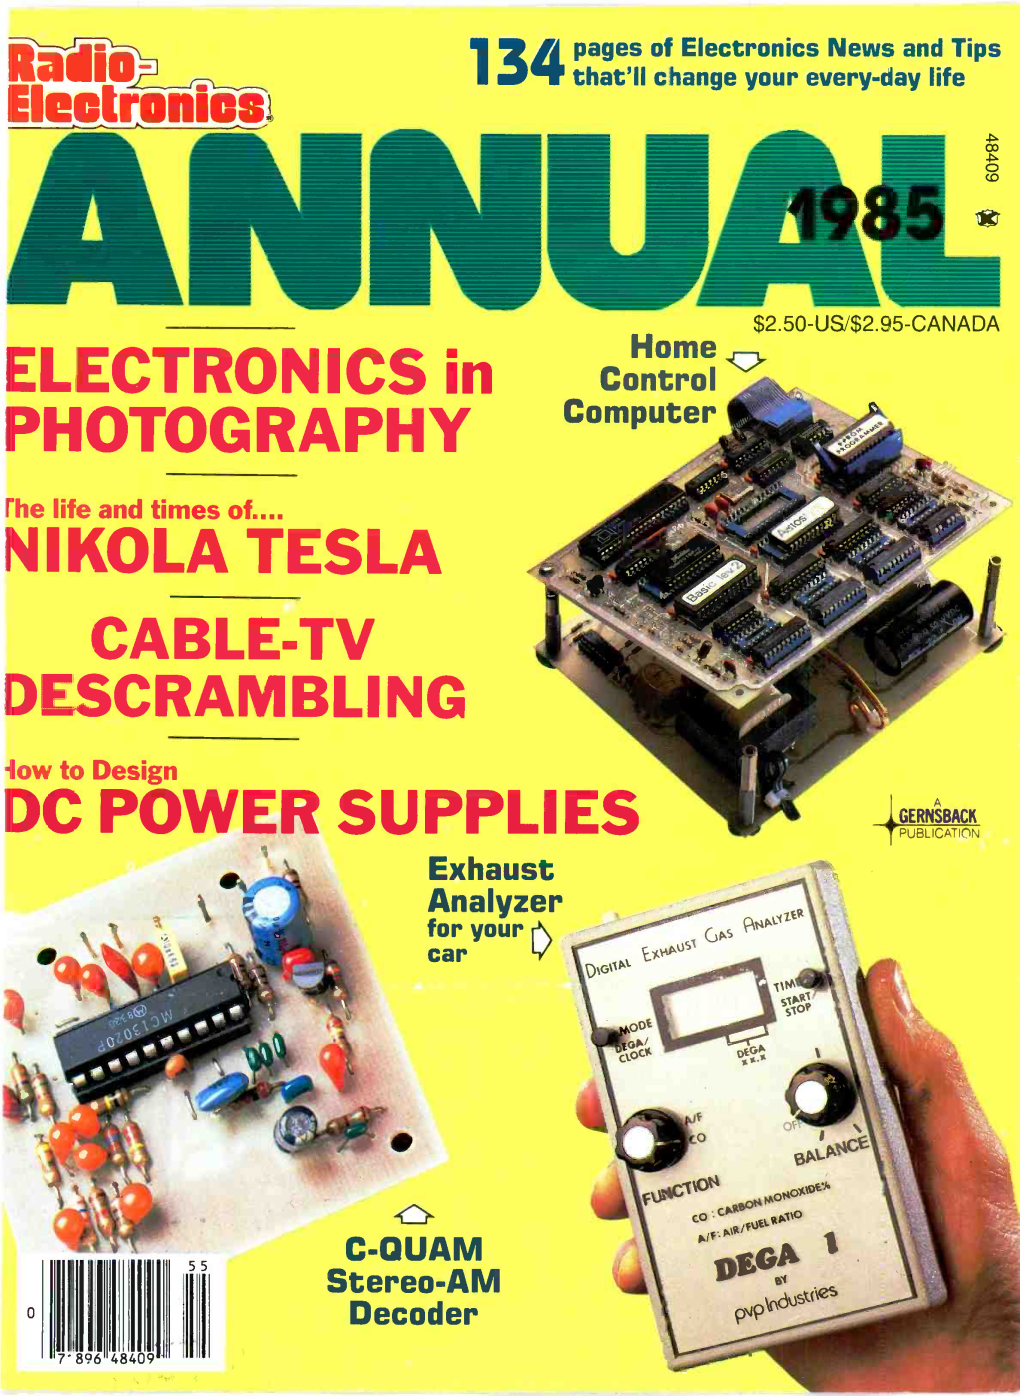 1985 with an Expanded Story on Electronics in Photography That Everyone Should Read